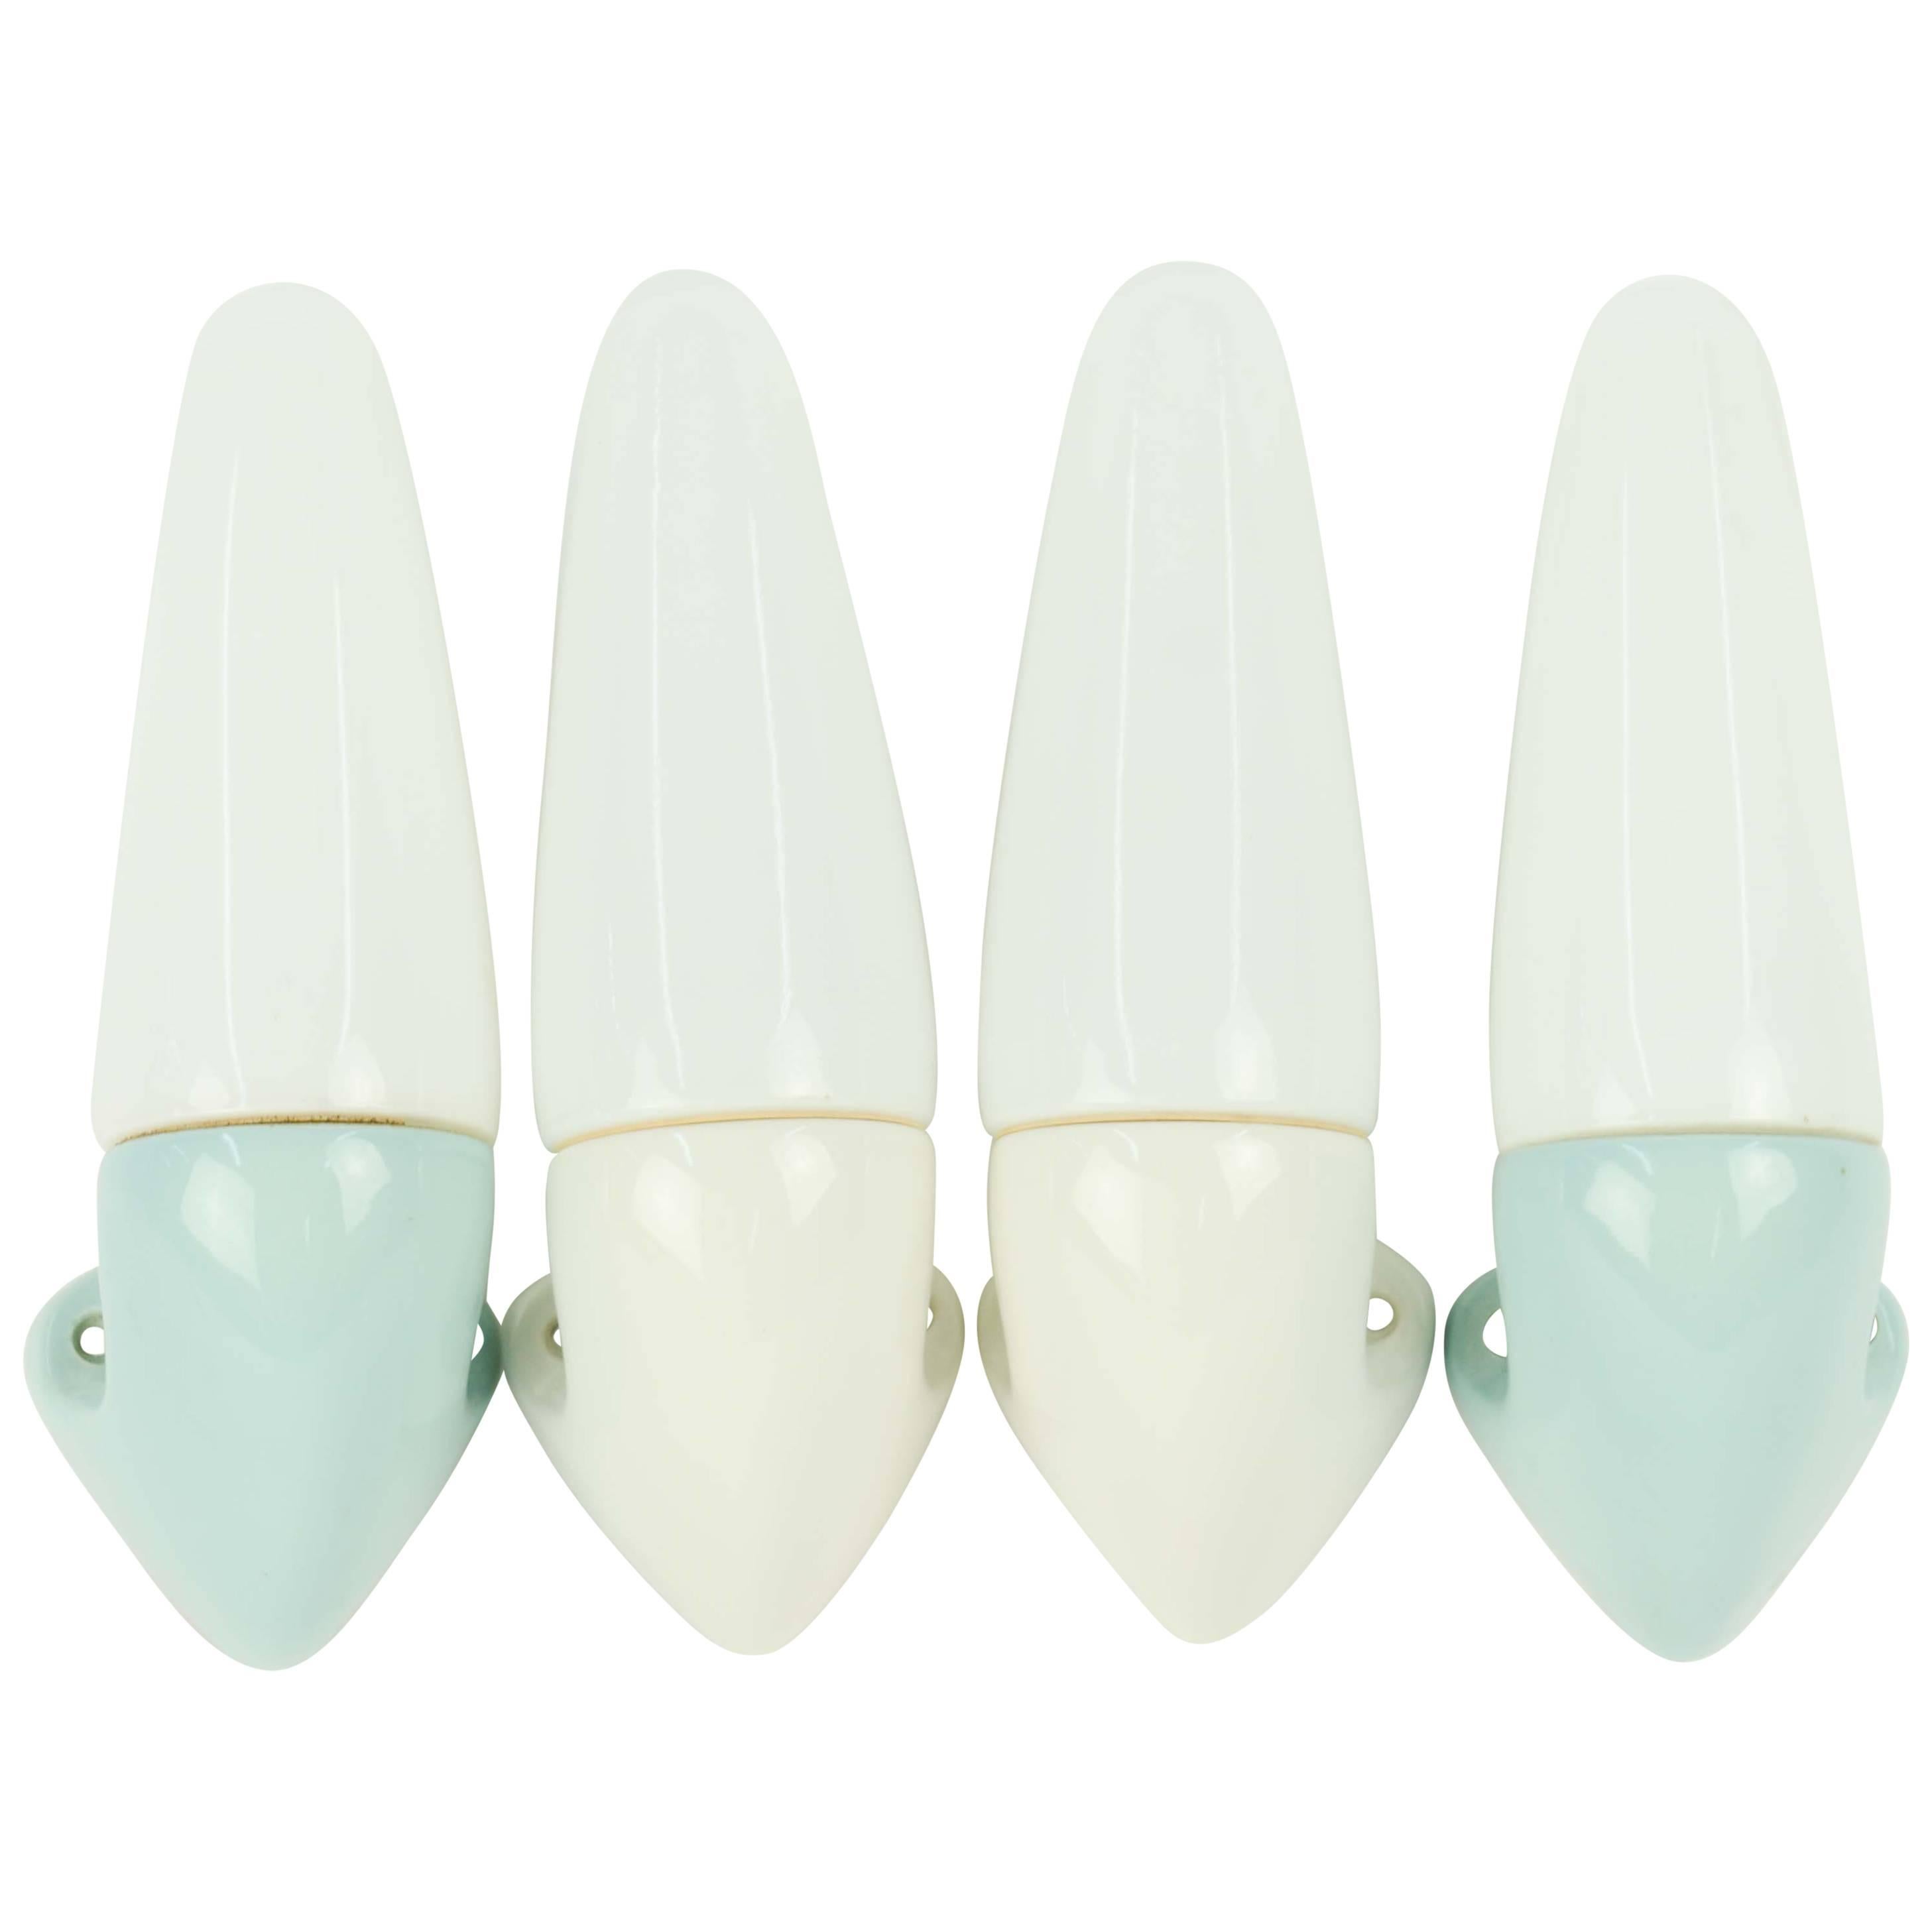 Up to Four, 1950s Ceramic and Glass Wall Sconces Wilhelm Wagenfeld of Germany